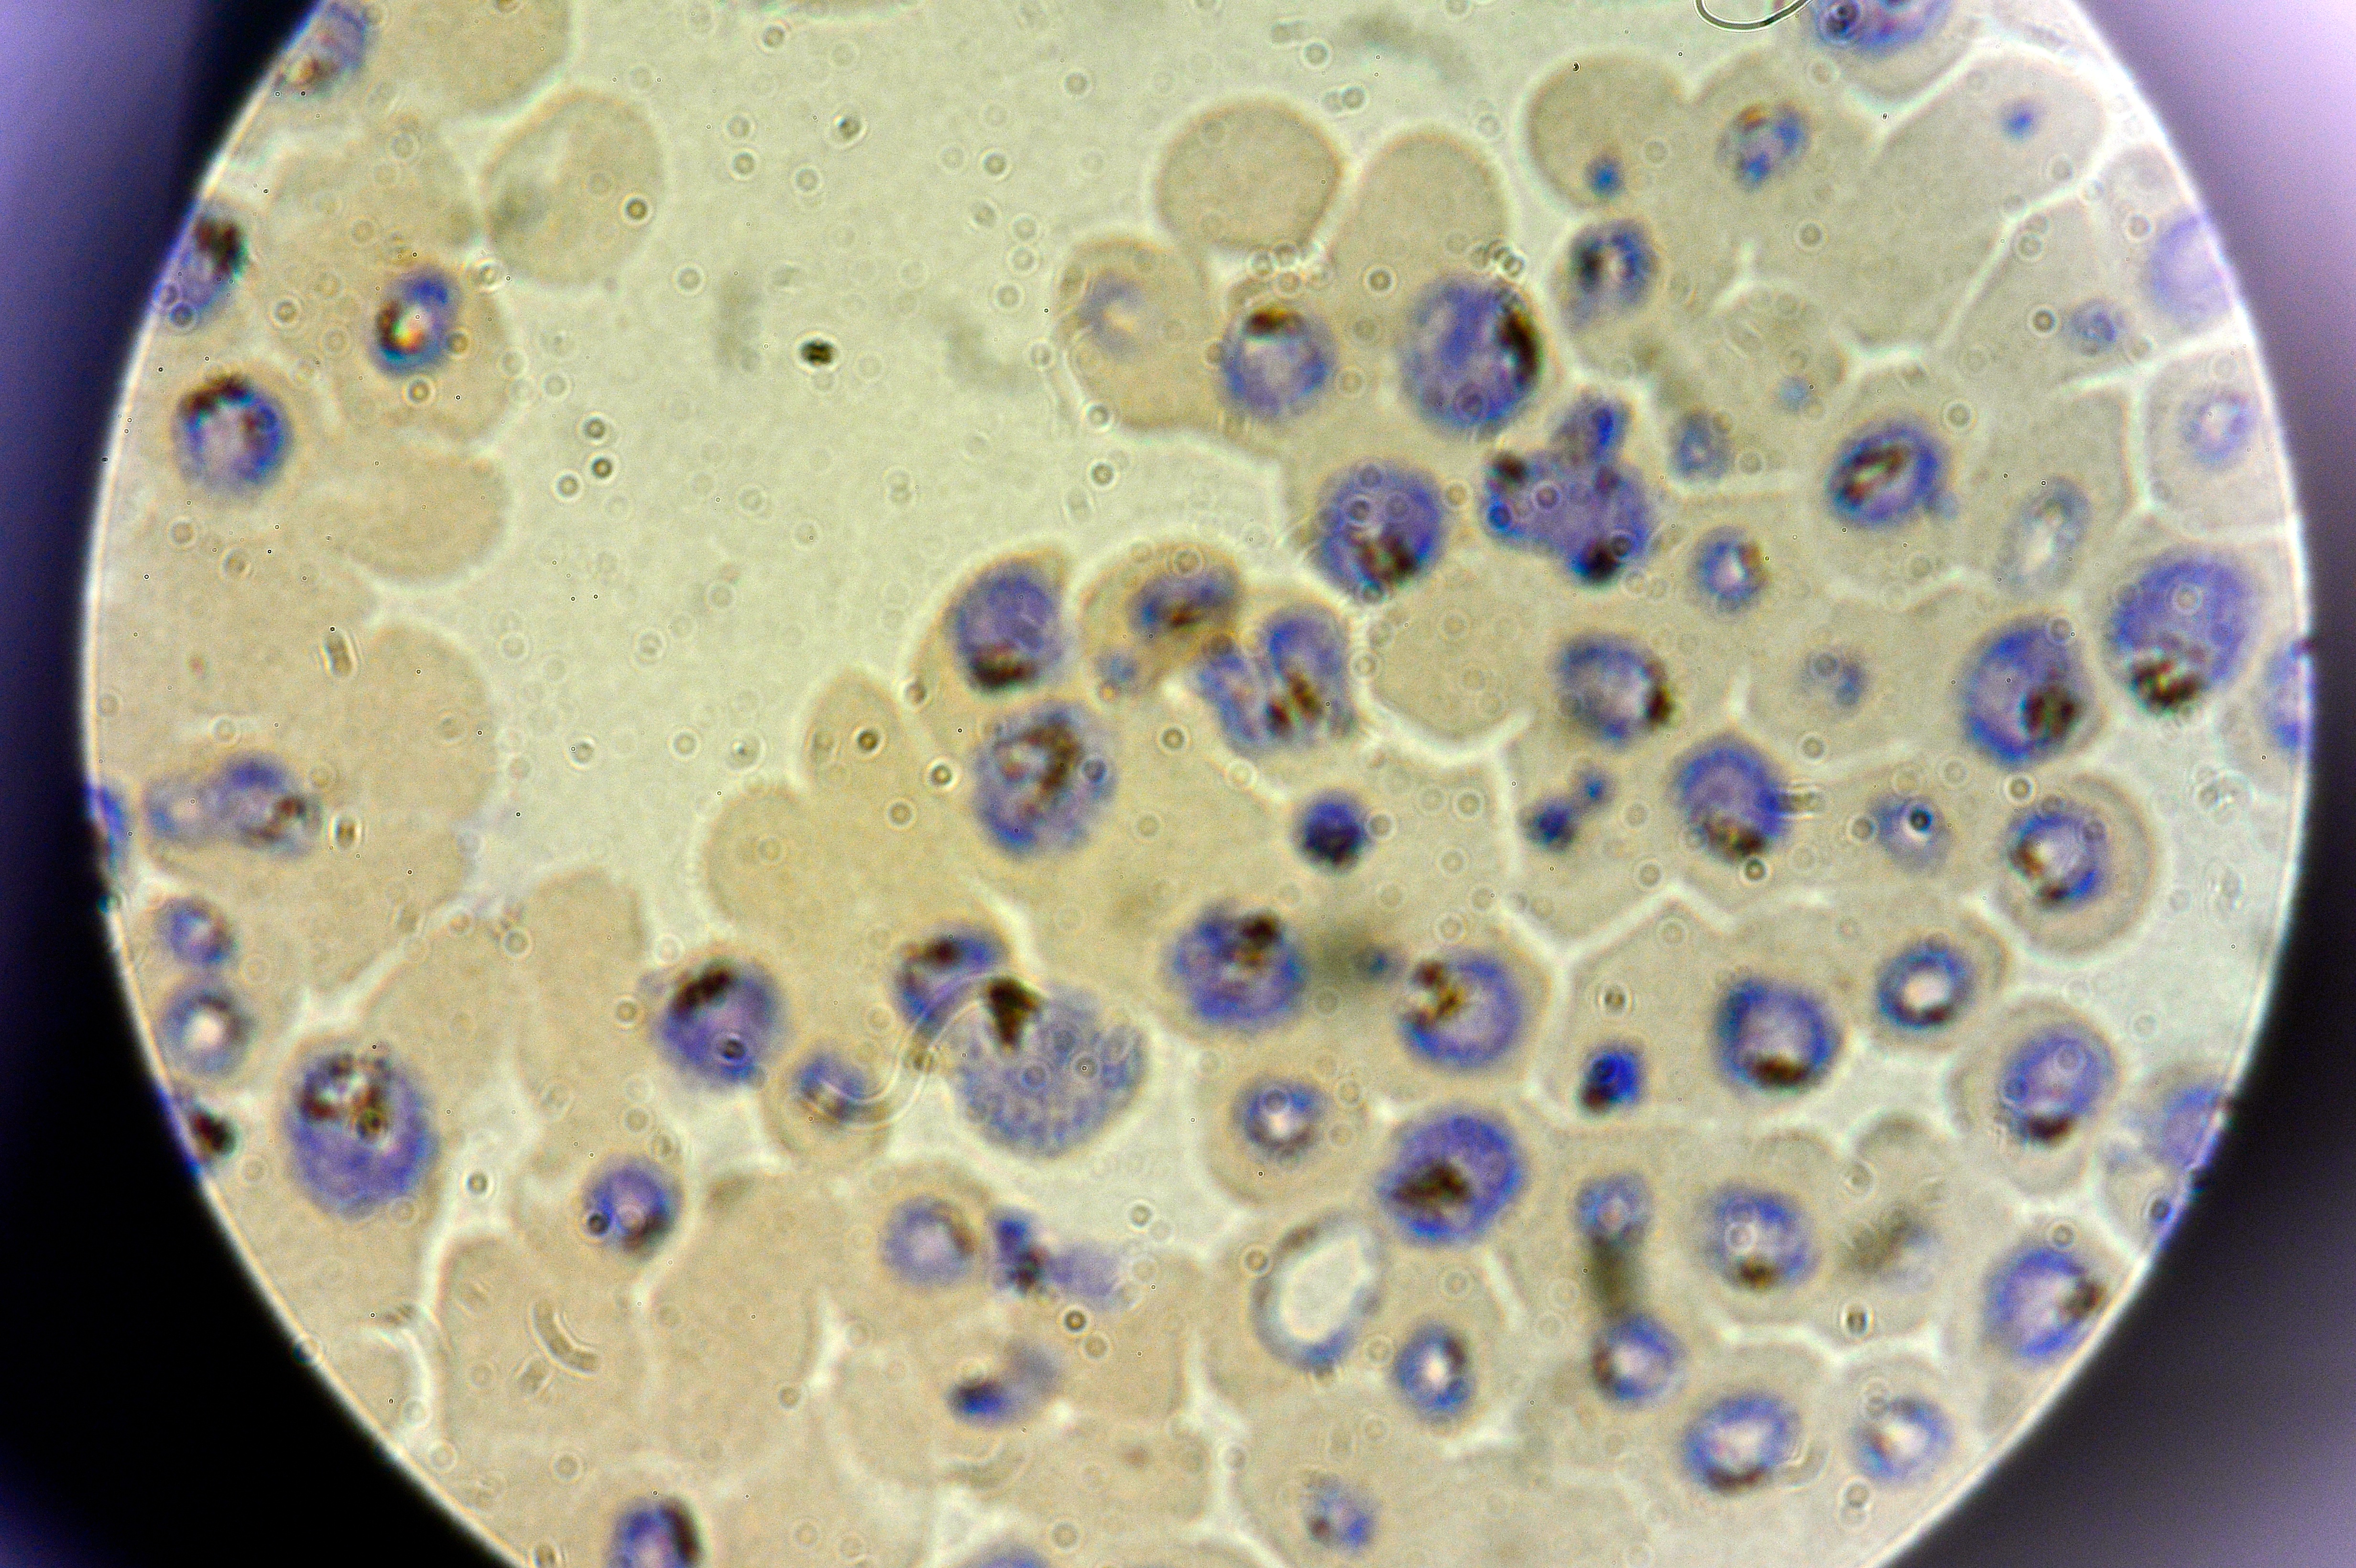 Plasmodium falciparum, one of the five parasites that causes malaria, shown growing in human red blood cells. 